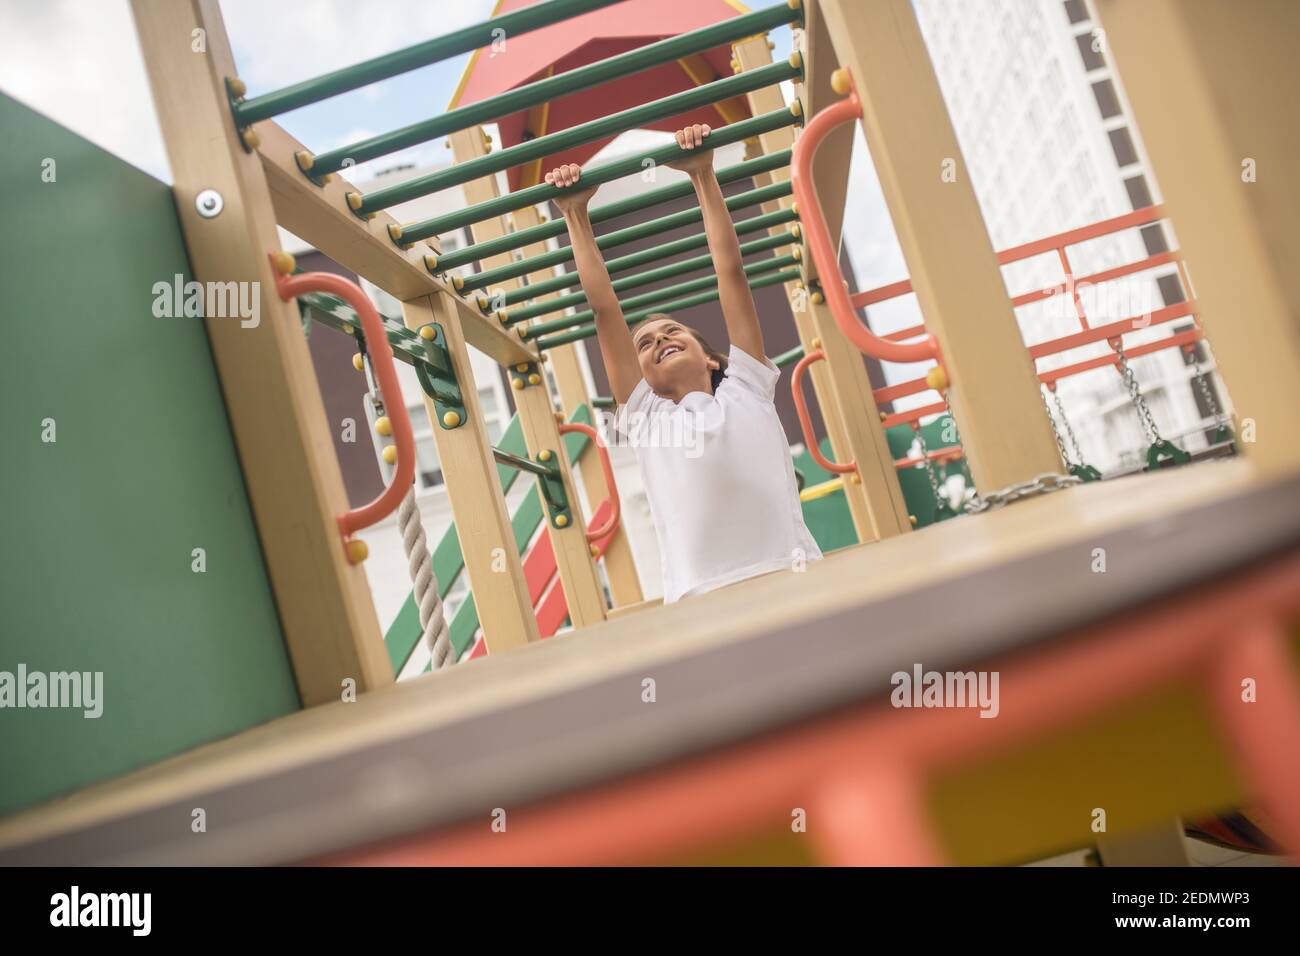 Cute boy in a white tshirt on a playground Stock Photo